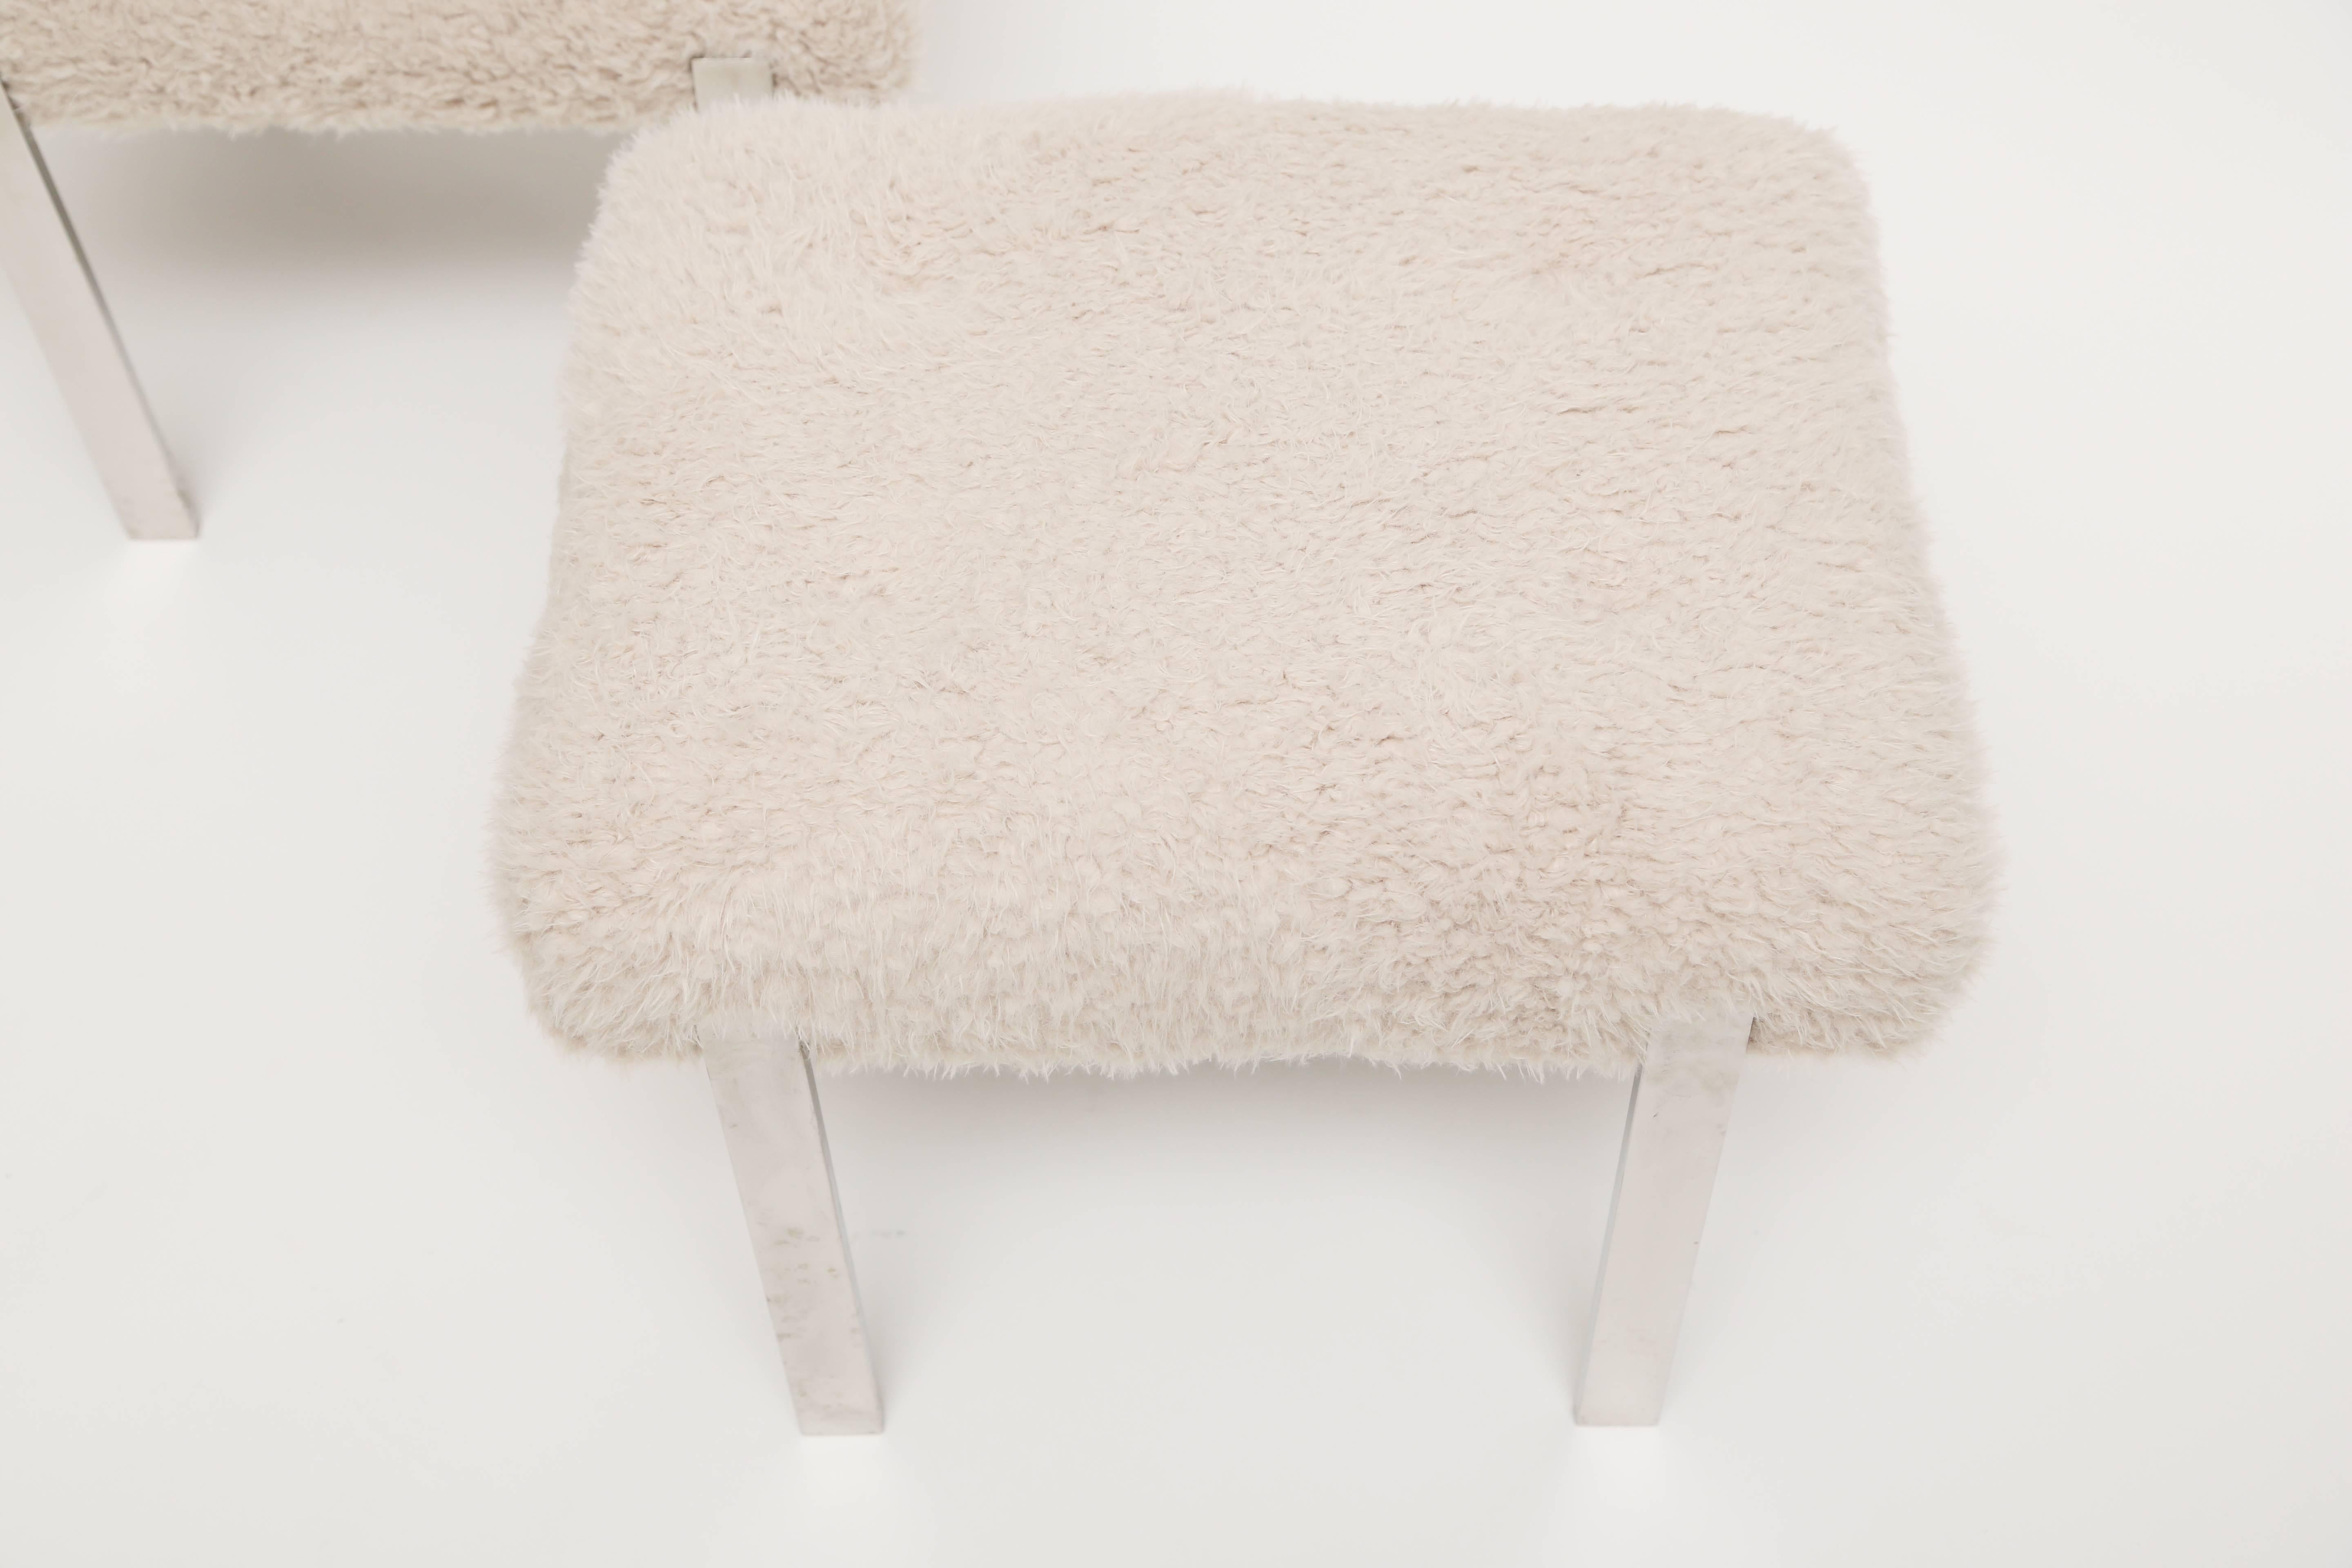 Pair of Harvey Probber Minimalist flat-bar steel ottomans.
Reupholstered in faux fur fabric.